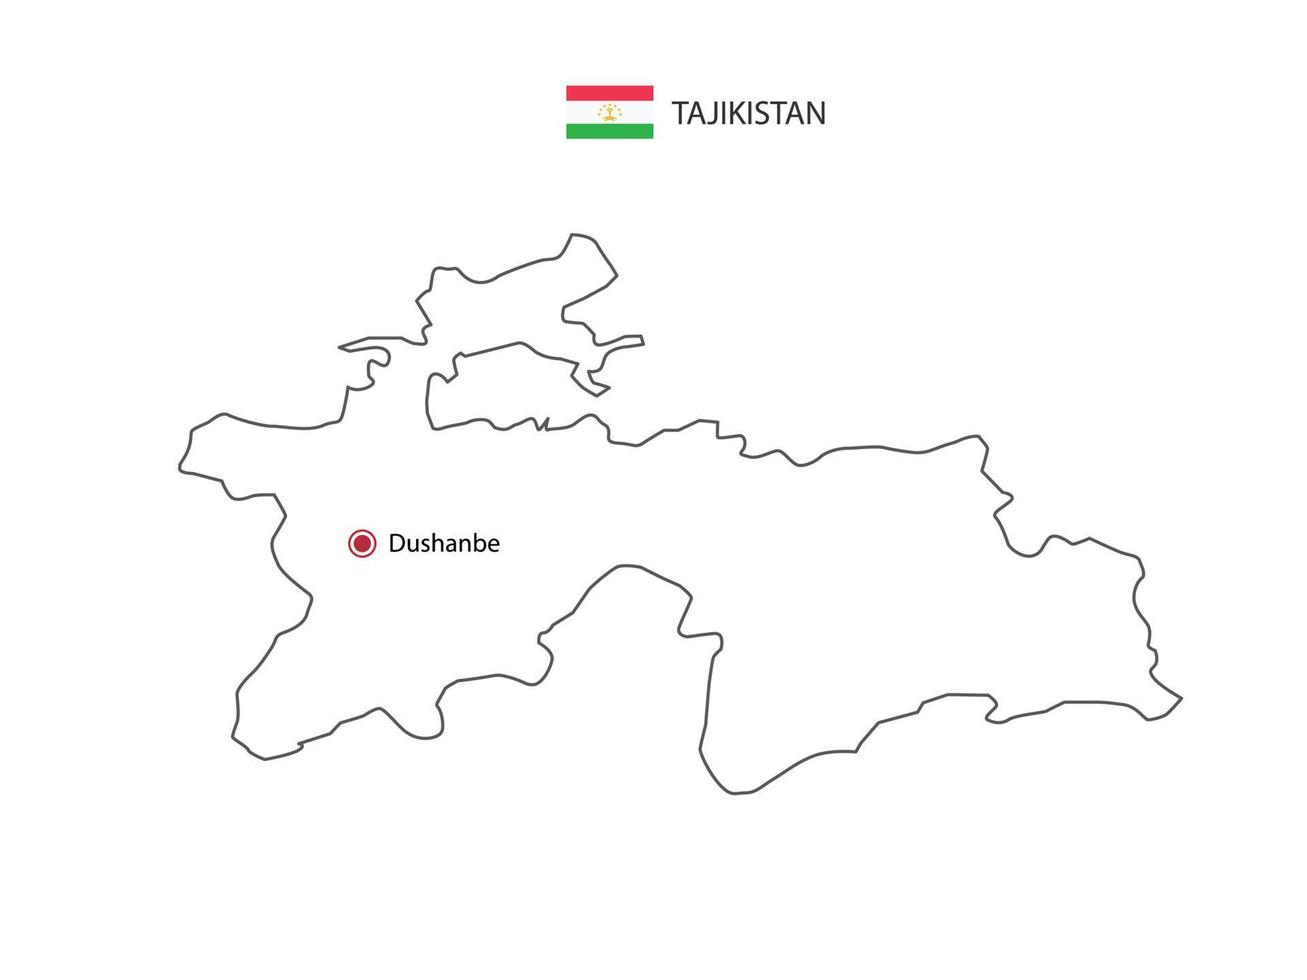 Hand draw thin black line vector of Tajikistan Map with capital city Dushanbe on white background.